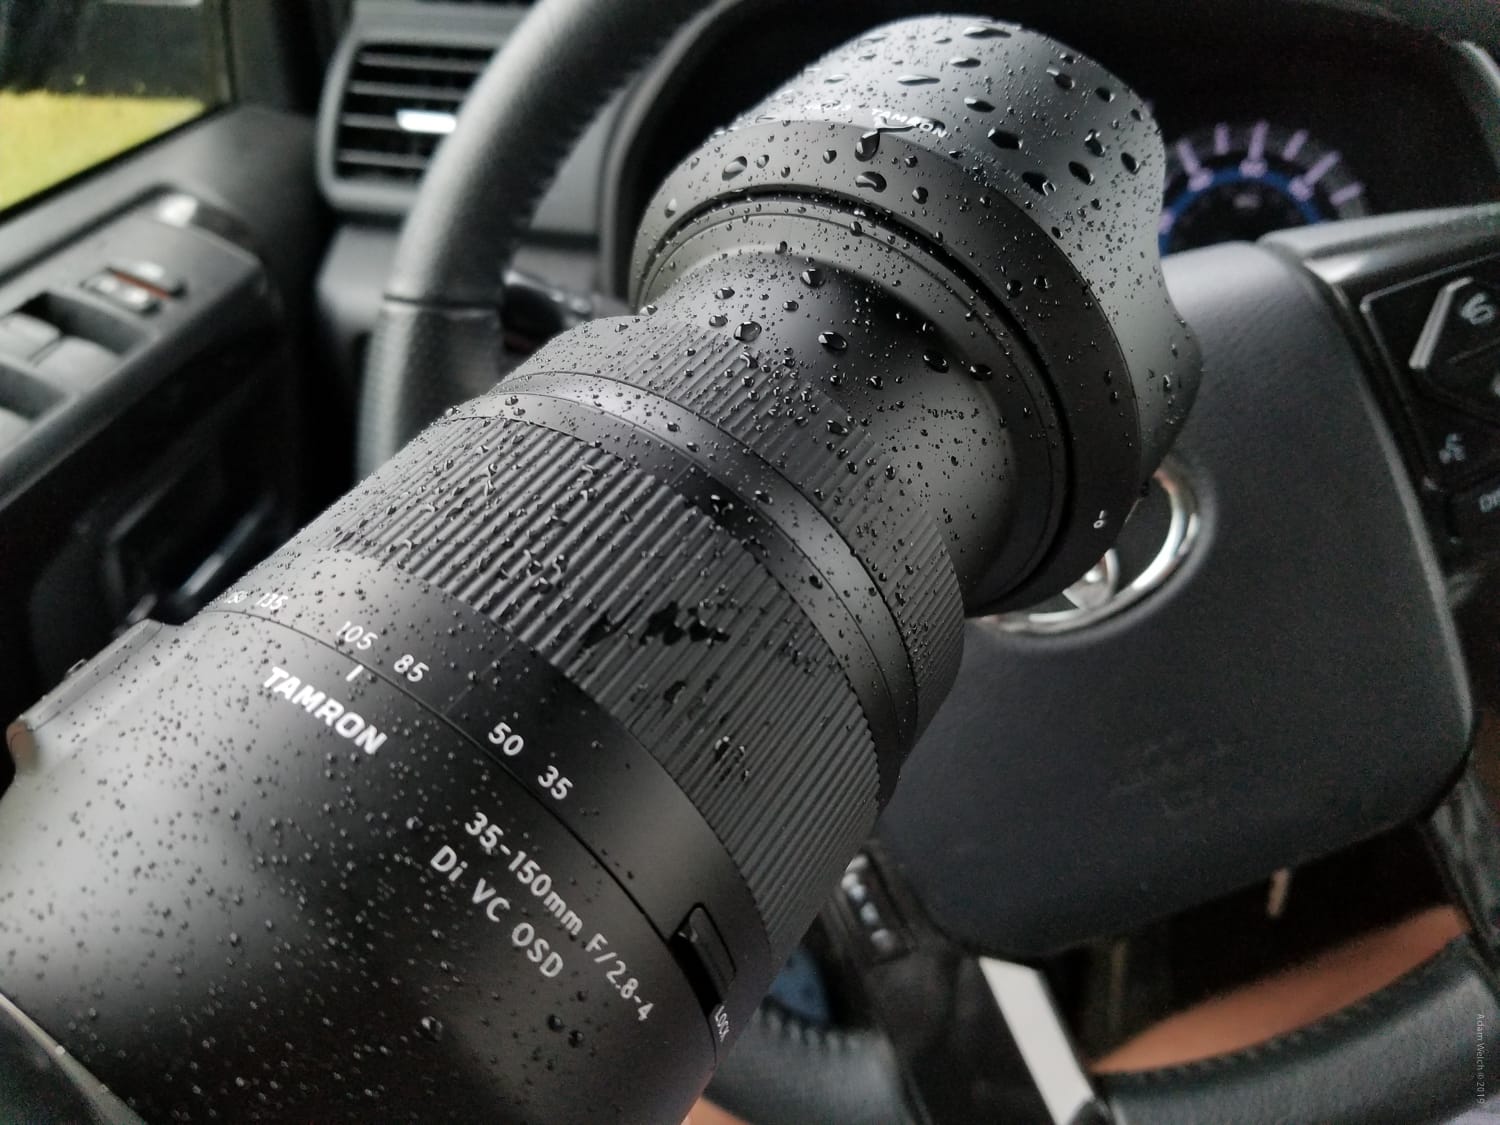 Hands-On Review of the Tamron 35-150mm f/2.8-4 Lens